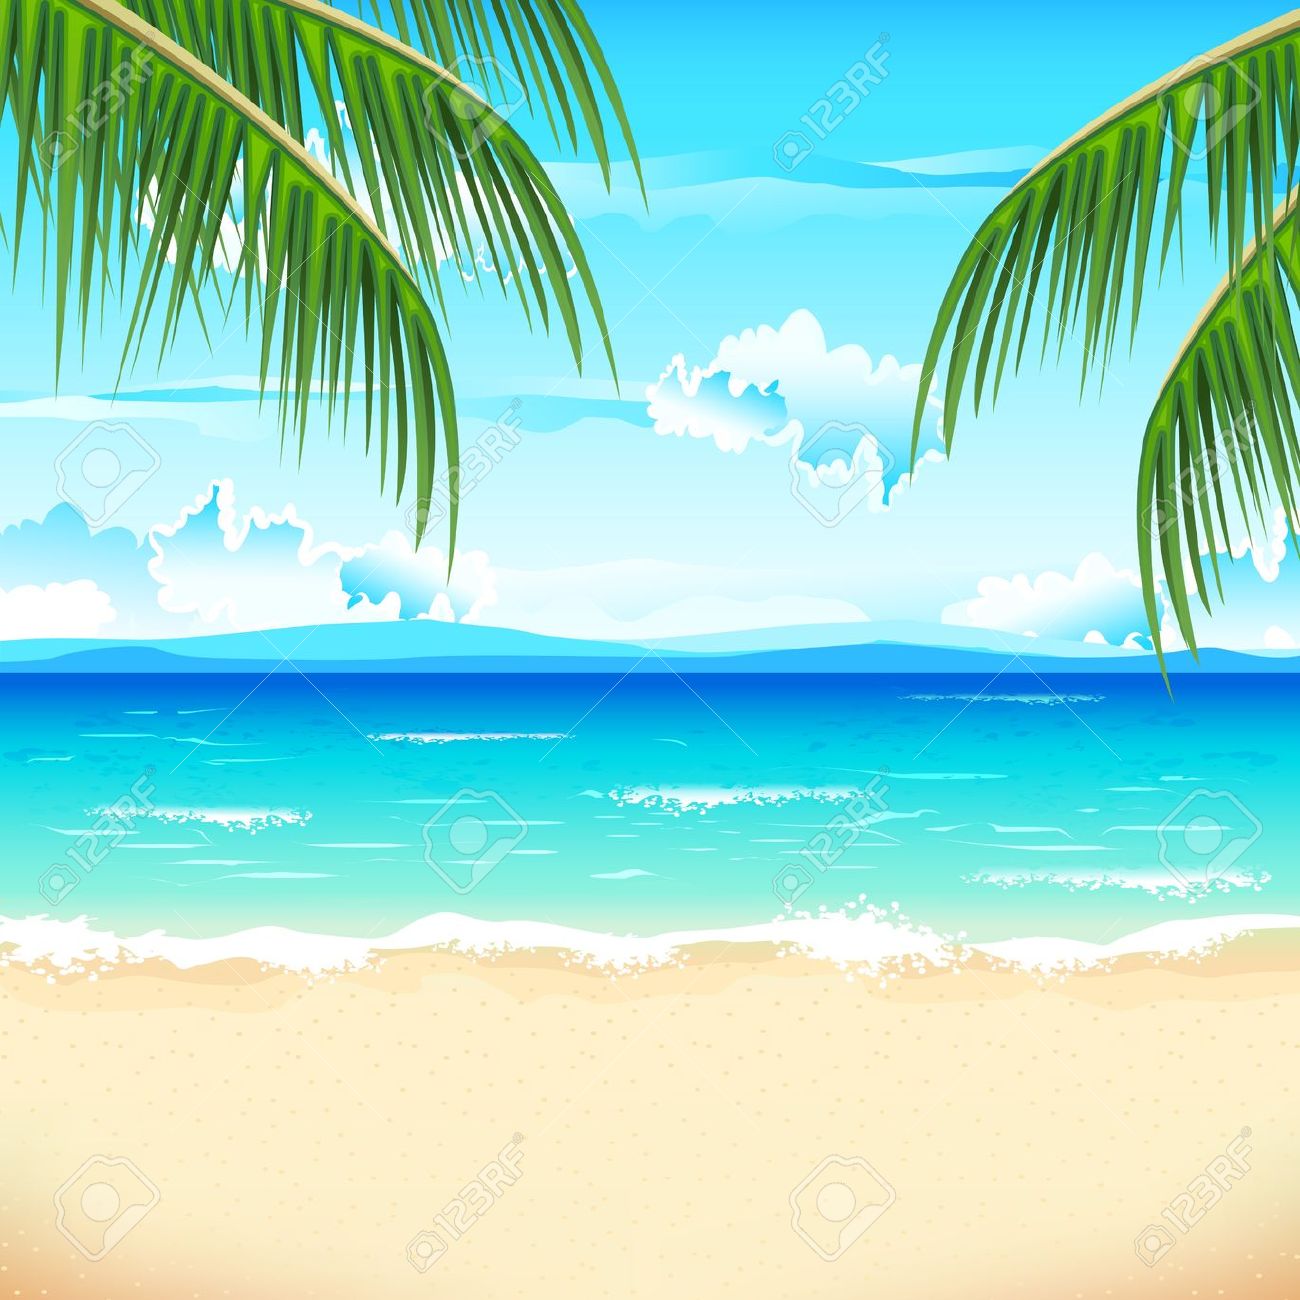 Free Beach Cliparts Borders, Download Free Clip Art, Free ...